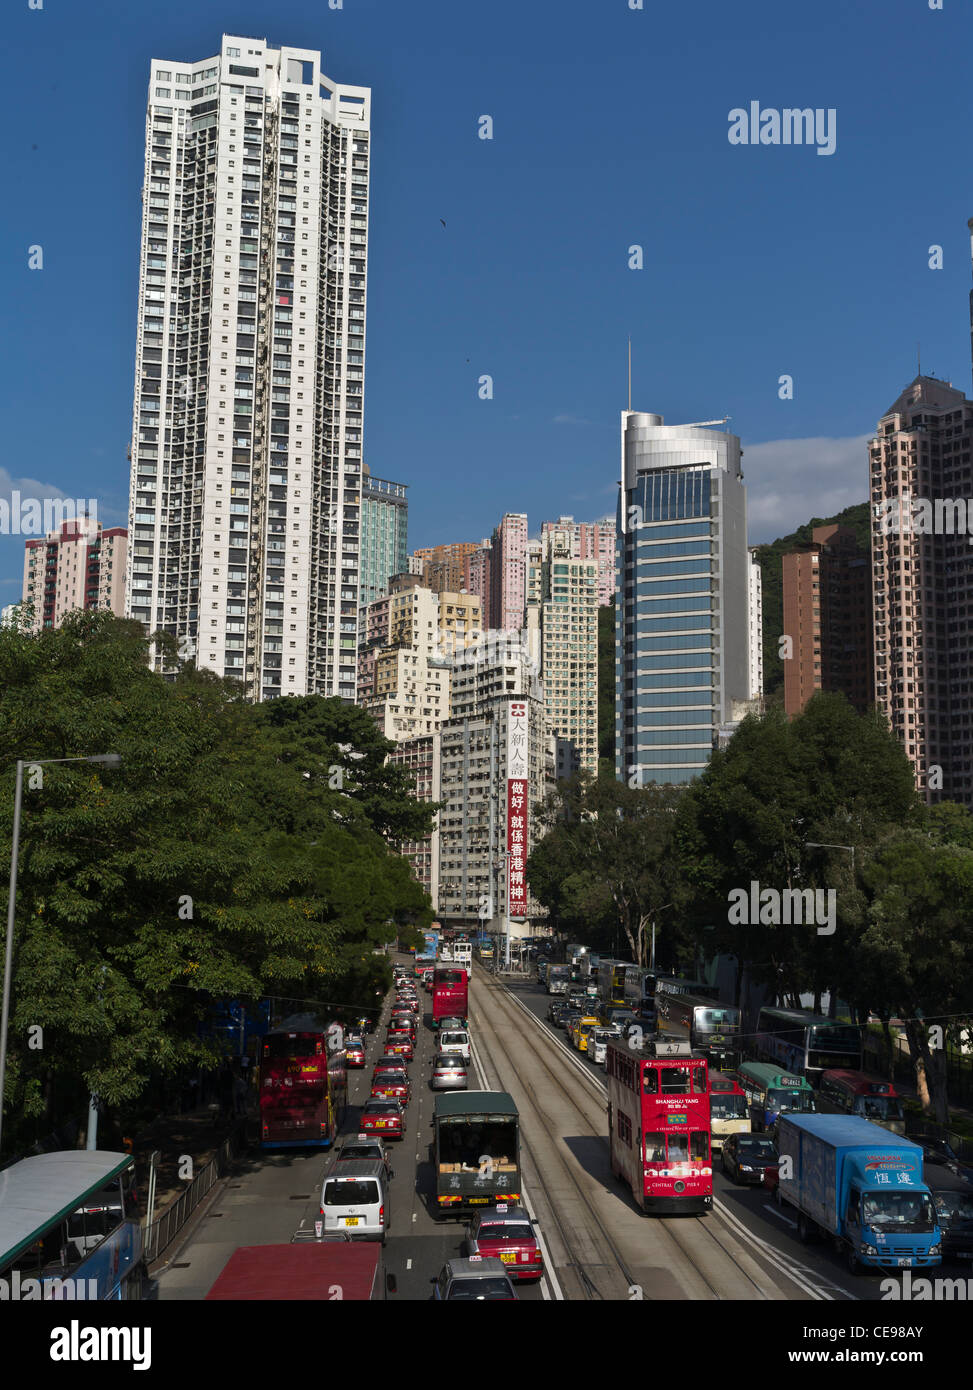 dh  CAUSEWAY BAY HONG KONG Road busy traffic jam tower block skyscrapers city roads cityscape Stock Photo